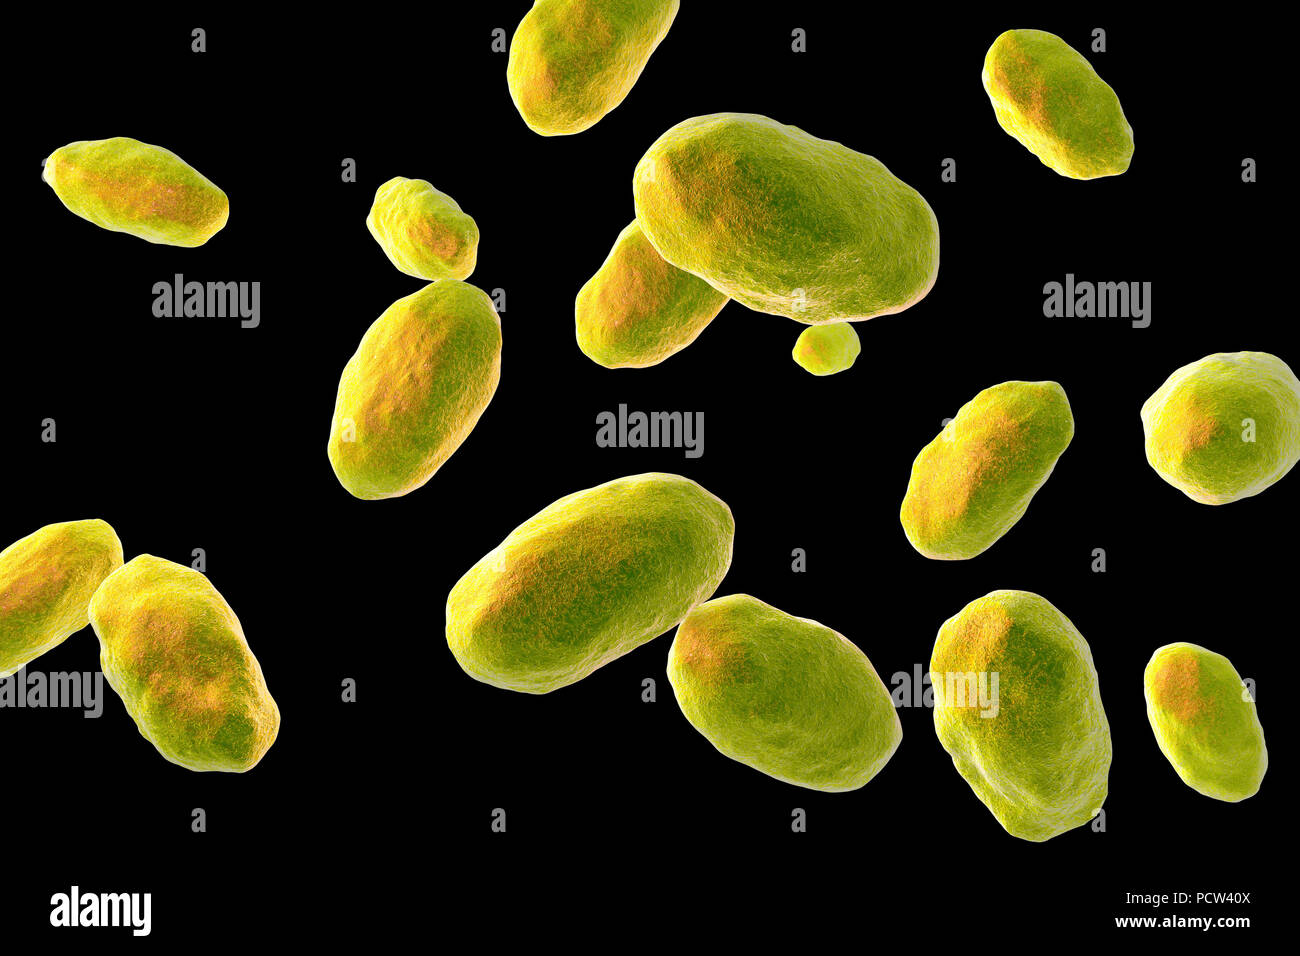 Computer illustration of the rod-shaped bacteria Yersinia enterocolitica (Gram negative), an enterobacteria.  may cause enteritis, an inflammation of the small intestines accompanied by abdominal pain, fever, vomiting and diarrhoea. It is thought to be a food poisoning organism. Although it has been isolated from a variety of food, none of the strains were associated with human infection. As of 1987, the pig appeared to be the only animal species to harbour the pathogenic human strain and it was uncertain whether it was an important source of human infection. Stock Photo